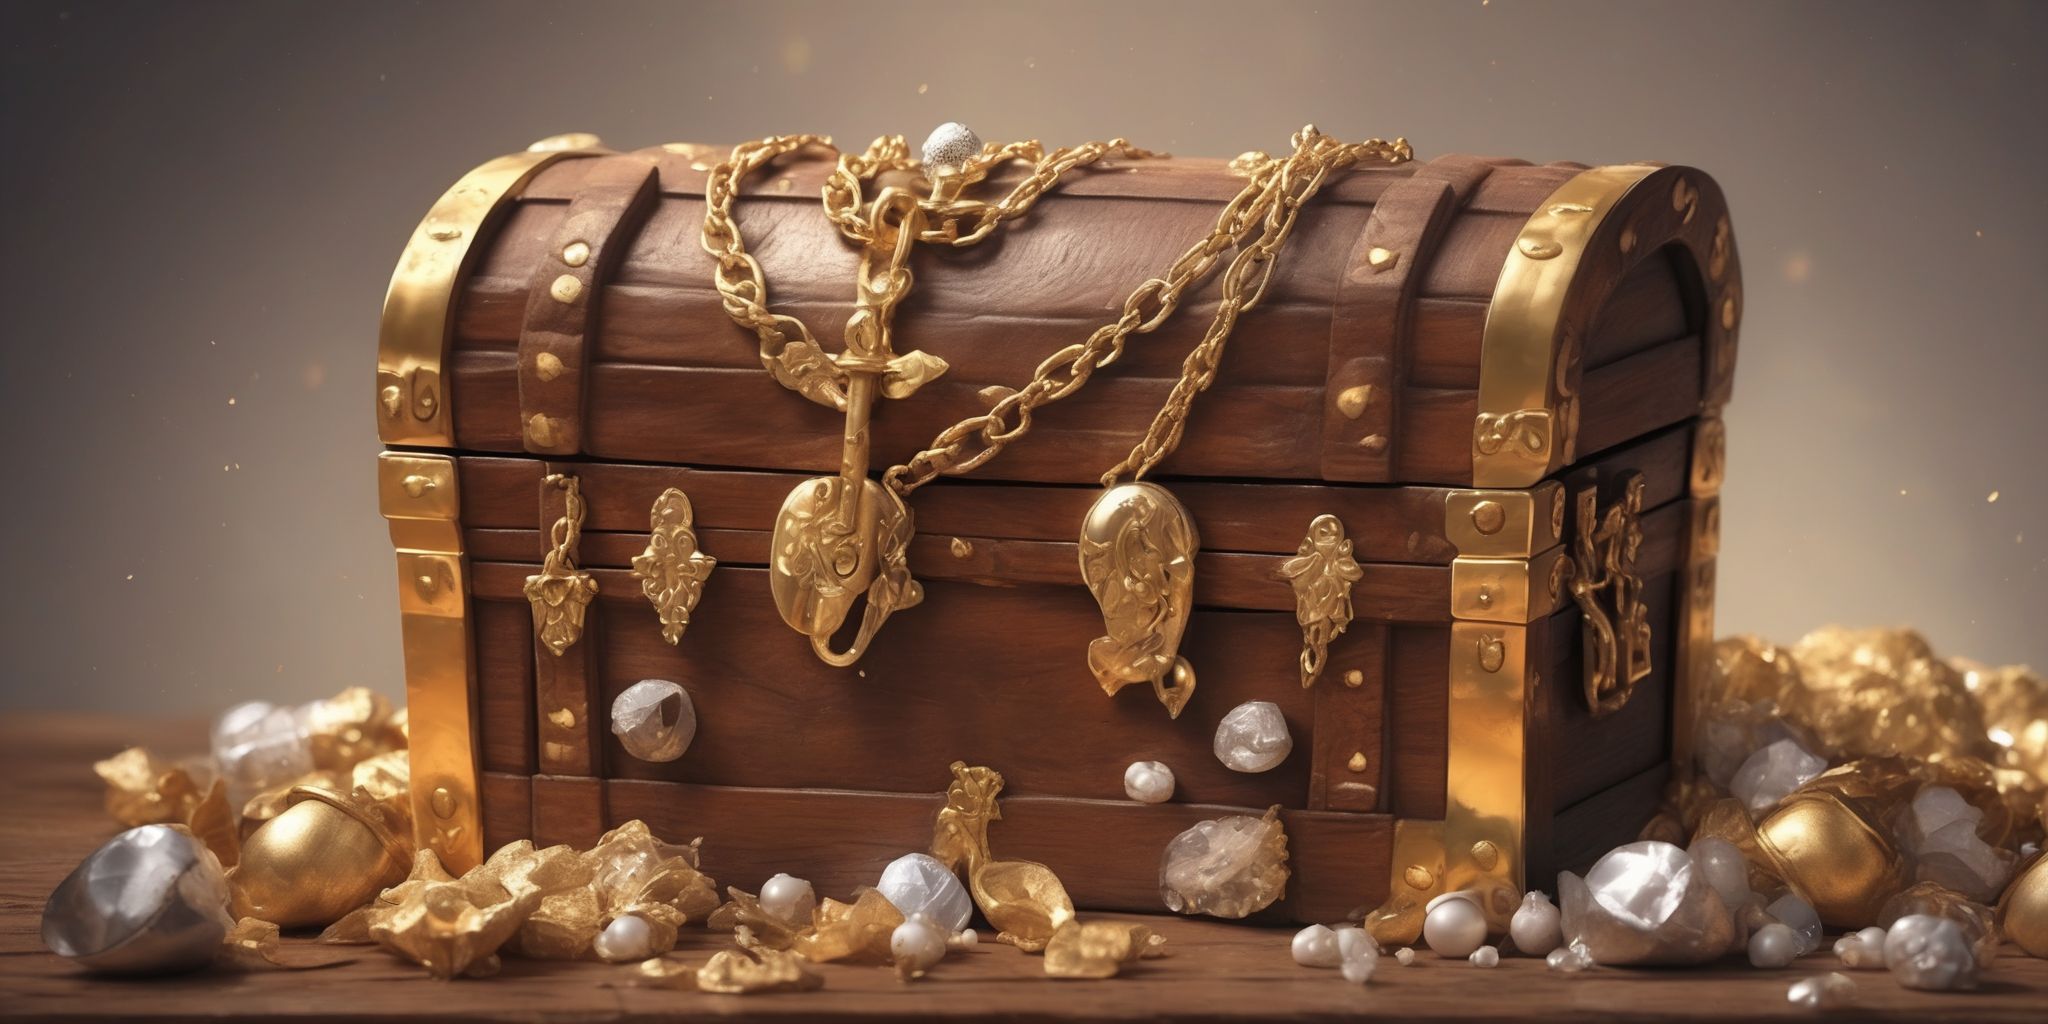 Treasure chest  in realistic, photographic style